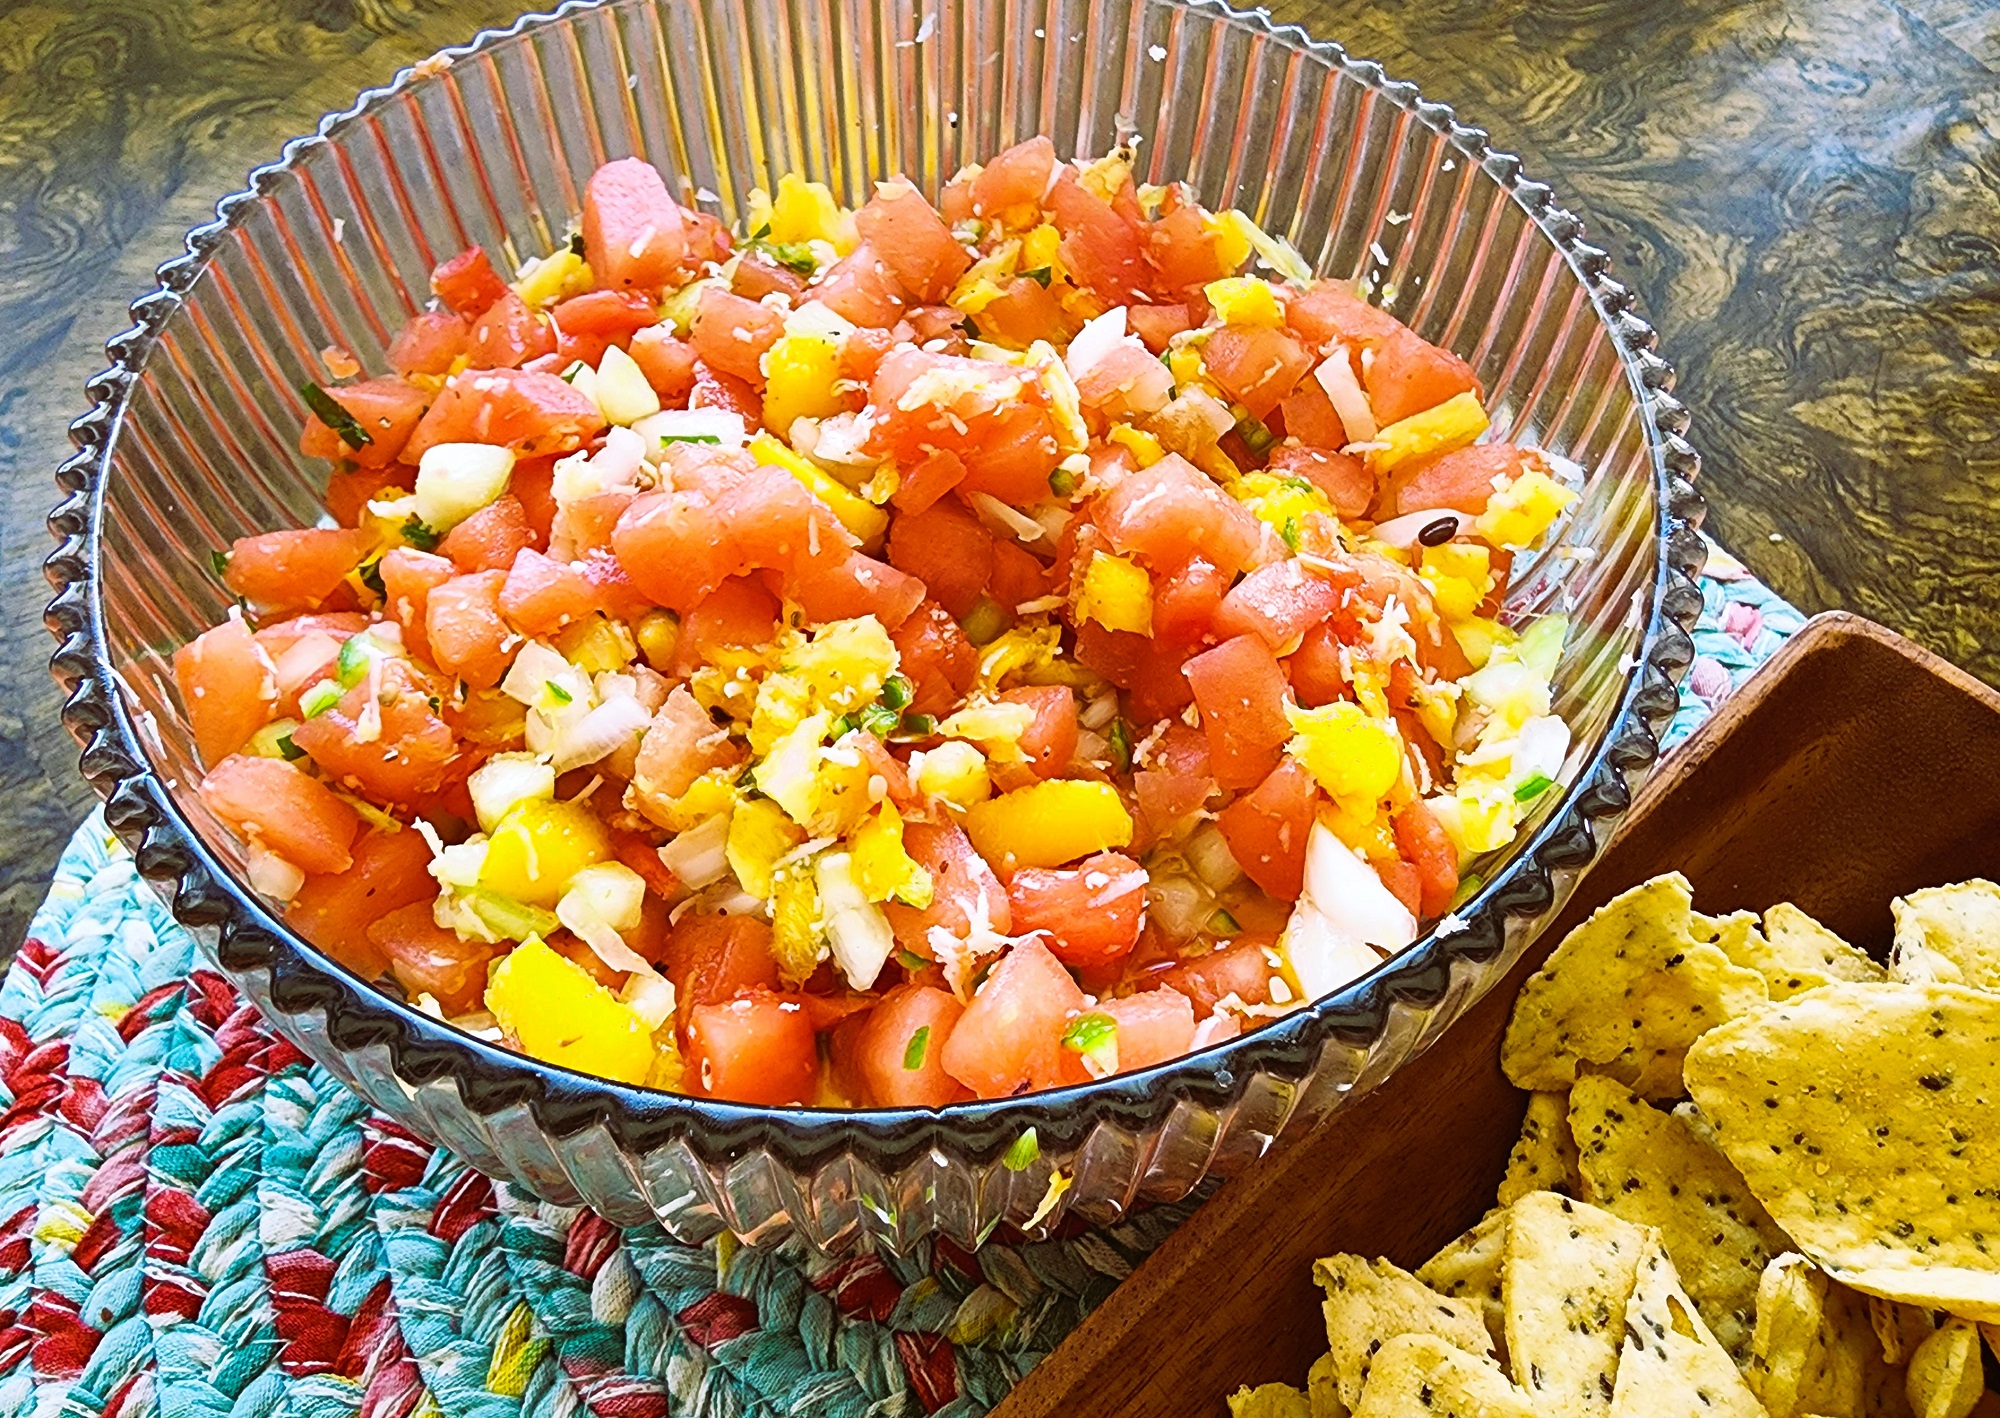 watermelon, pineapple, mango, shredded coconut, lime juice, cucumber, onion, spicy pepper chopped and added to a glass bowl with tortilla chips